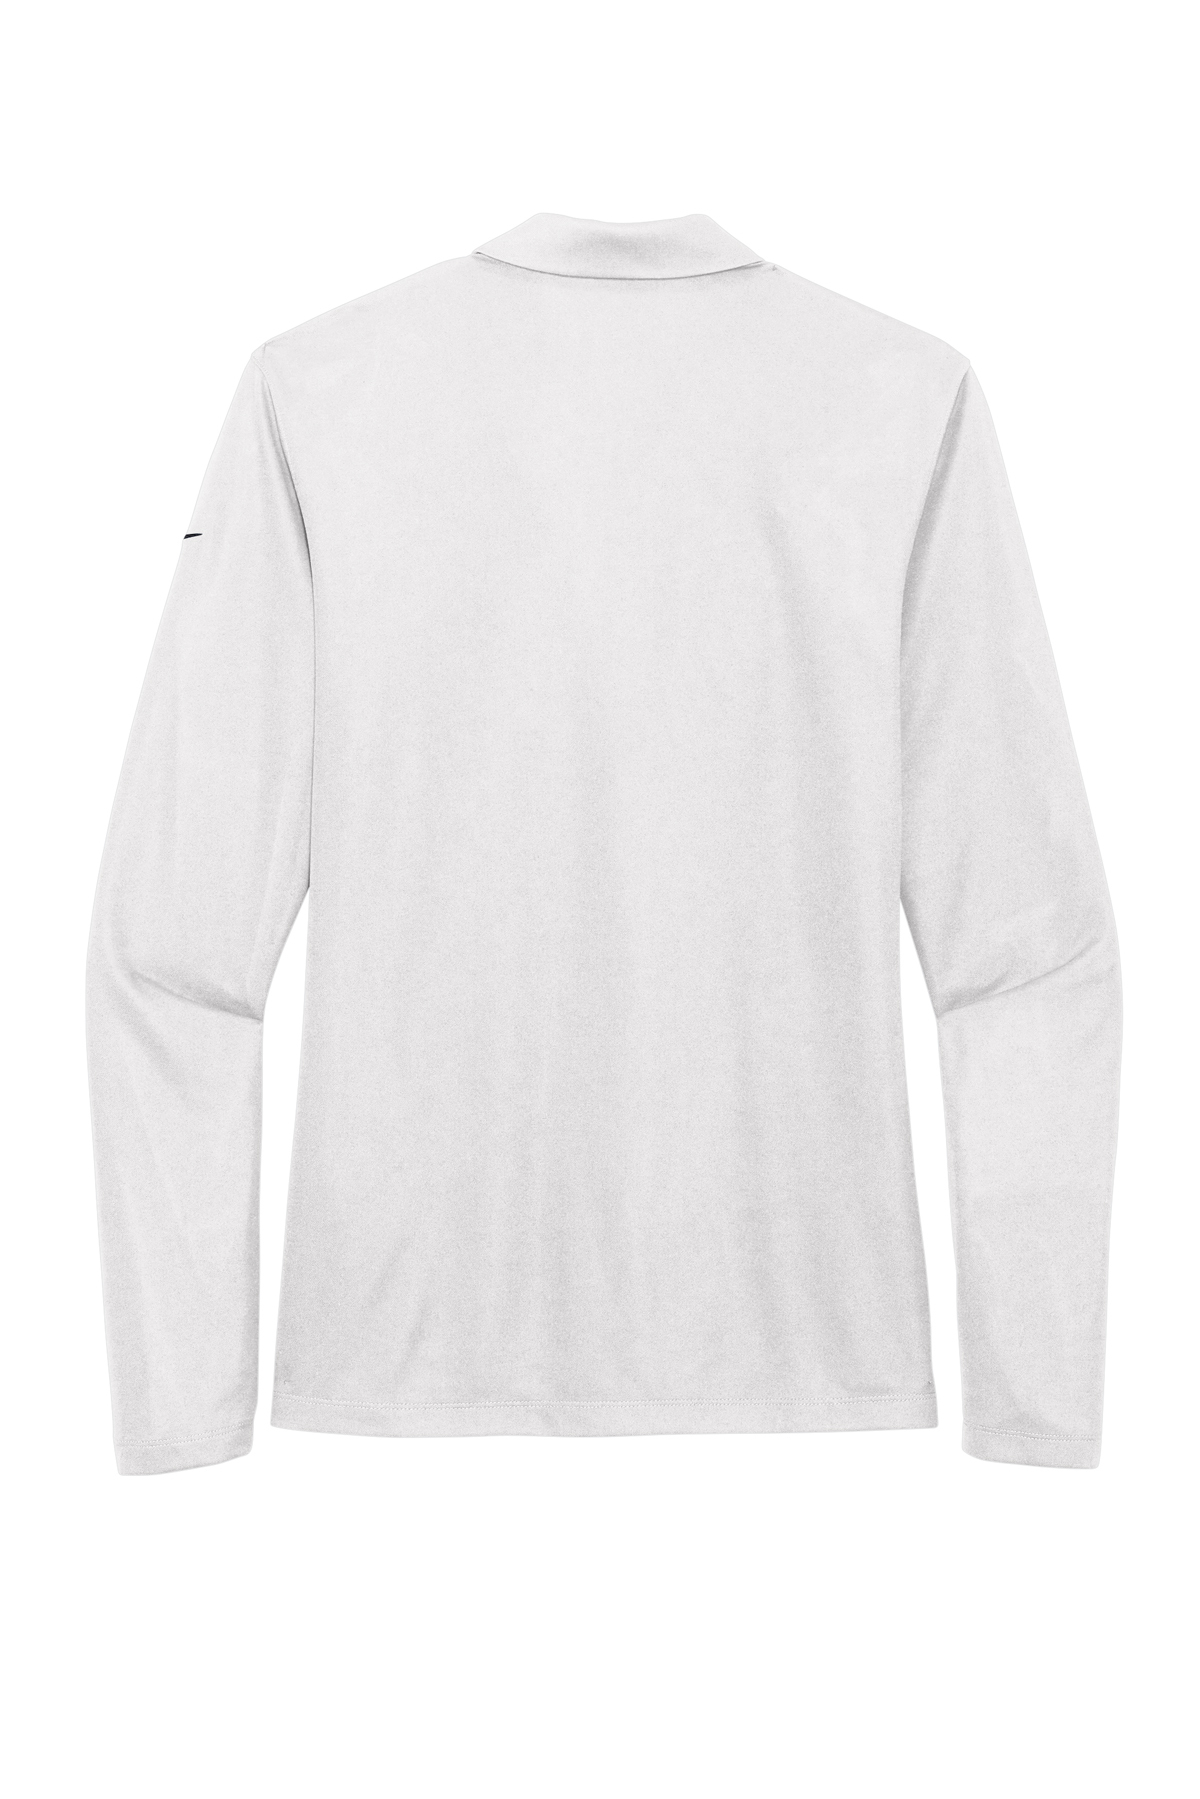 Nike Ladies Dri-FIT Micro Pique 2.0 Long Sleeve Polo | Product ...